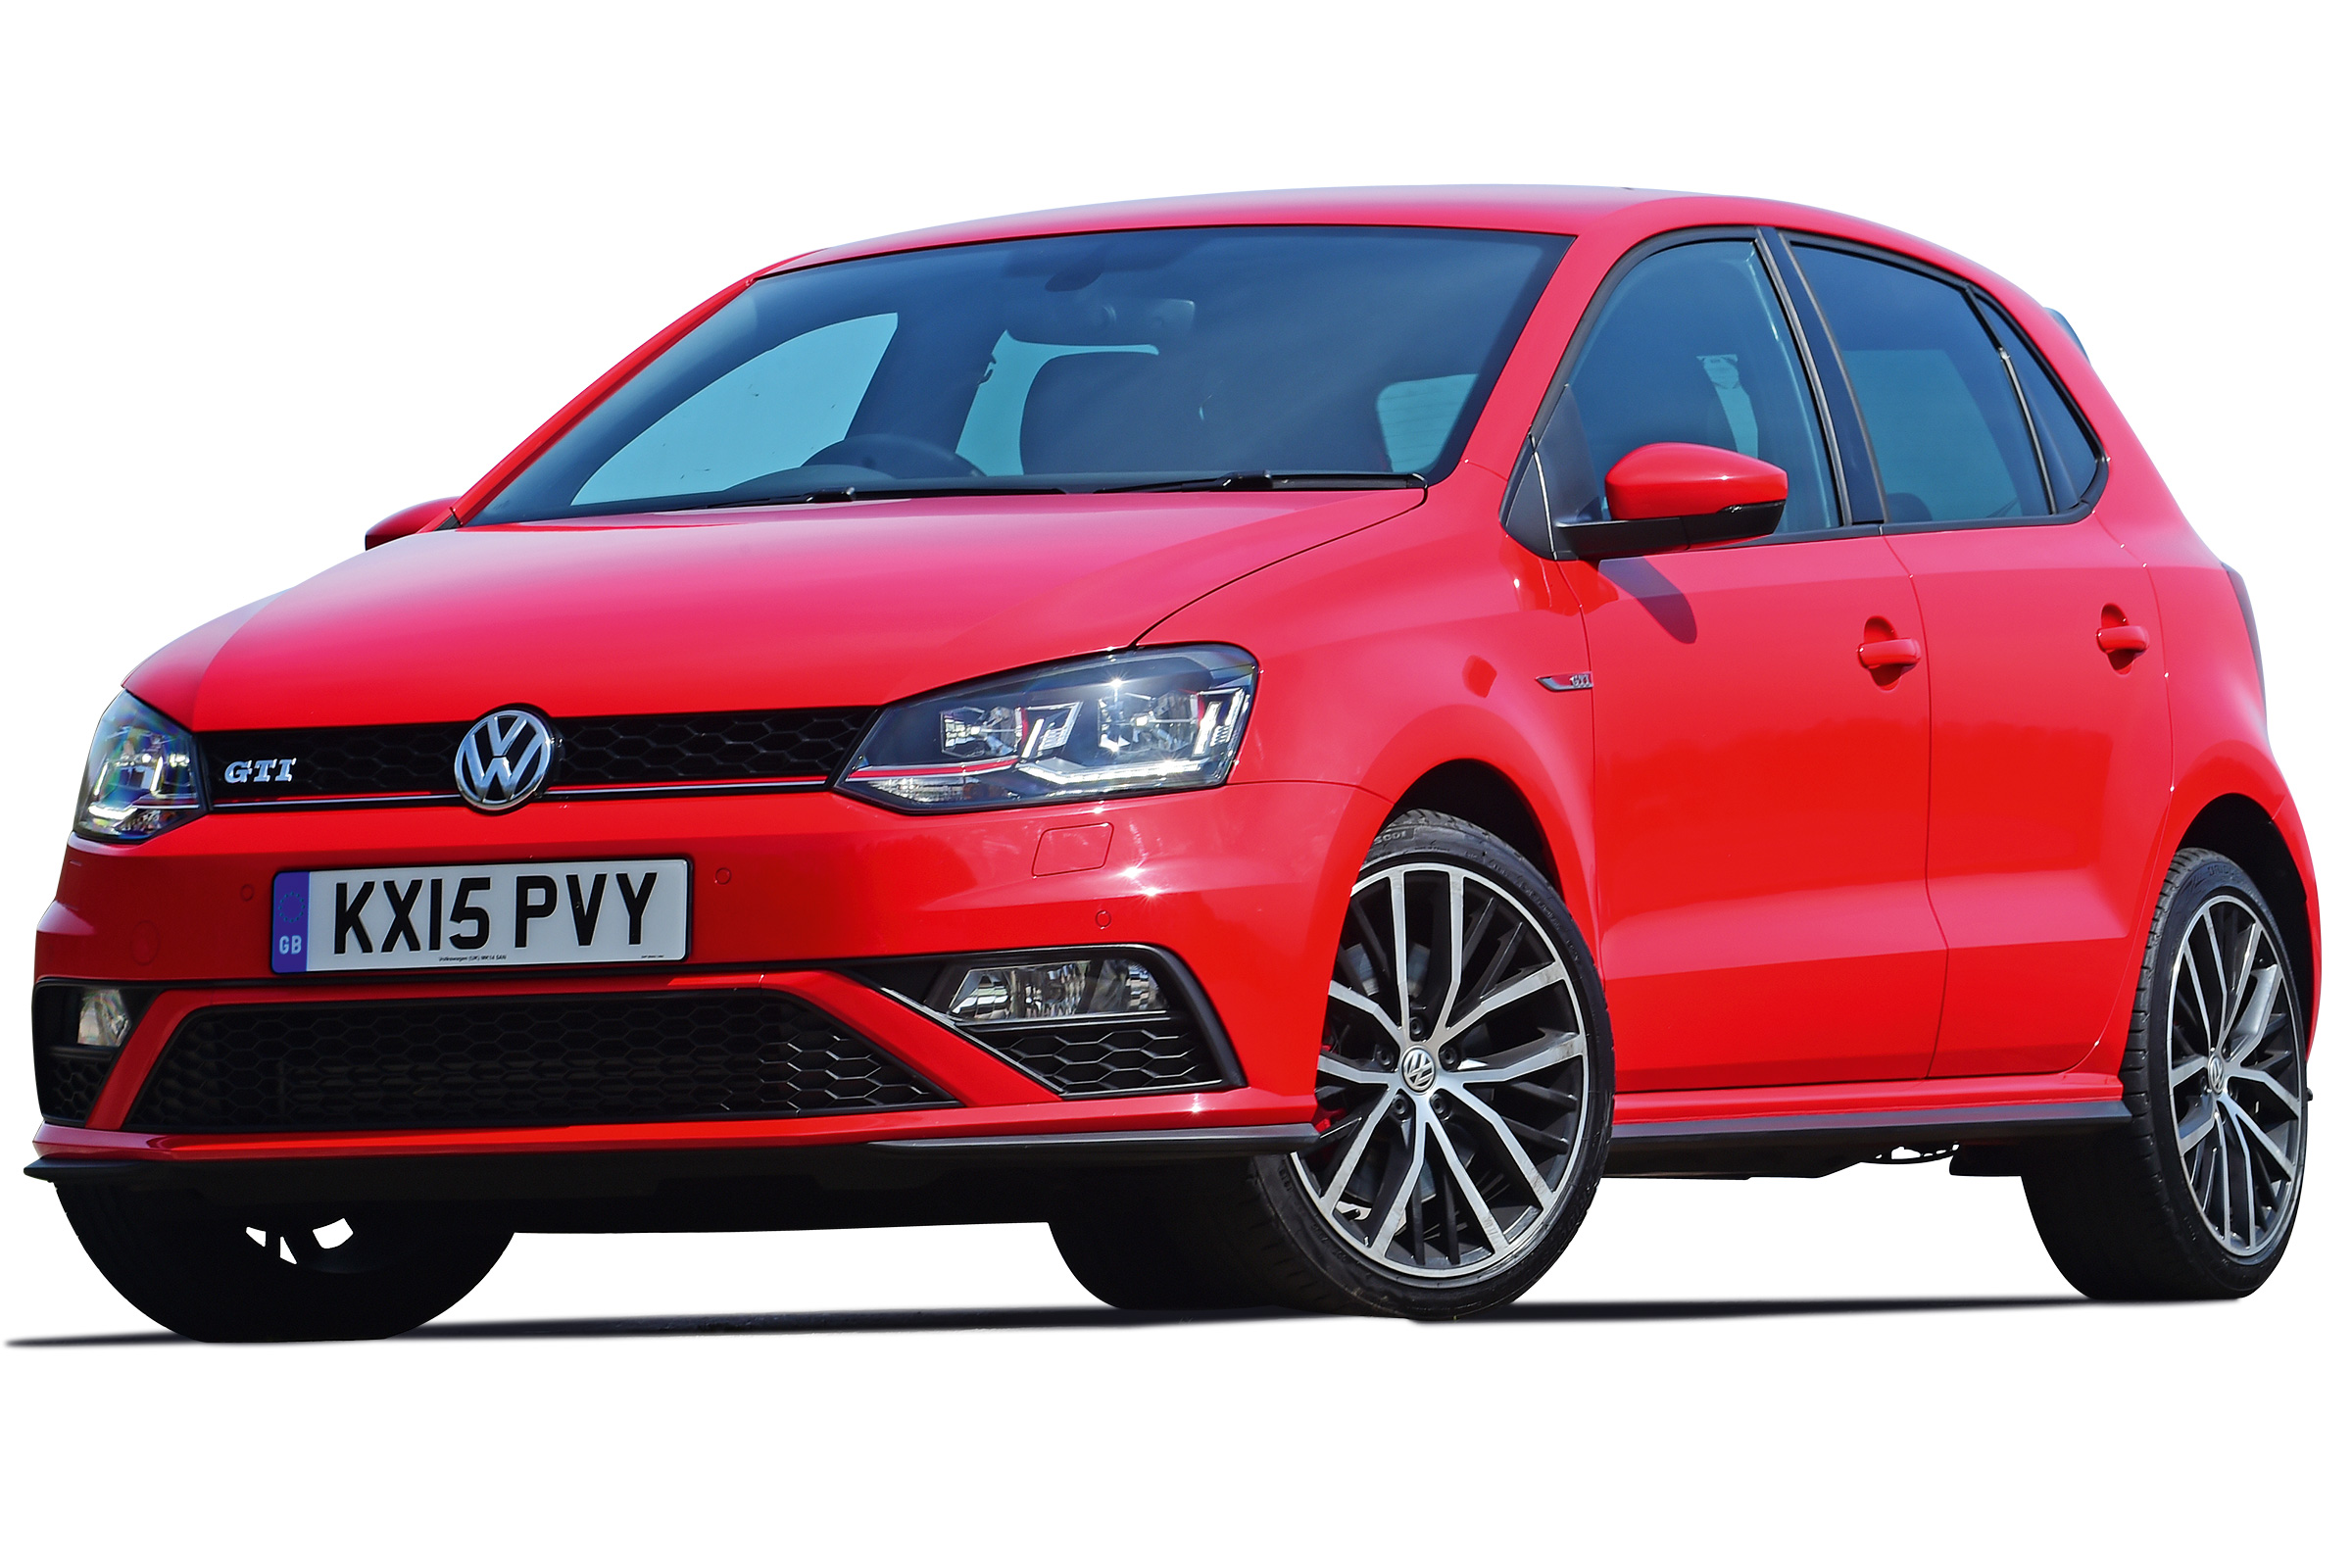 Volkswagen Polo Gti Hatchback 10 17 Owner Reviews Mpg Problems Reliability Carbuyer